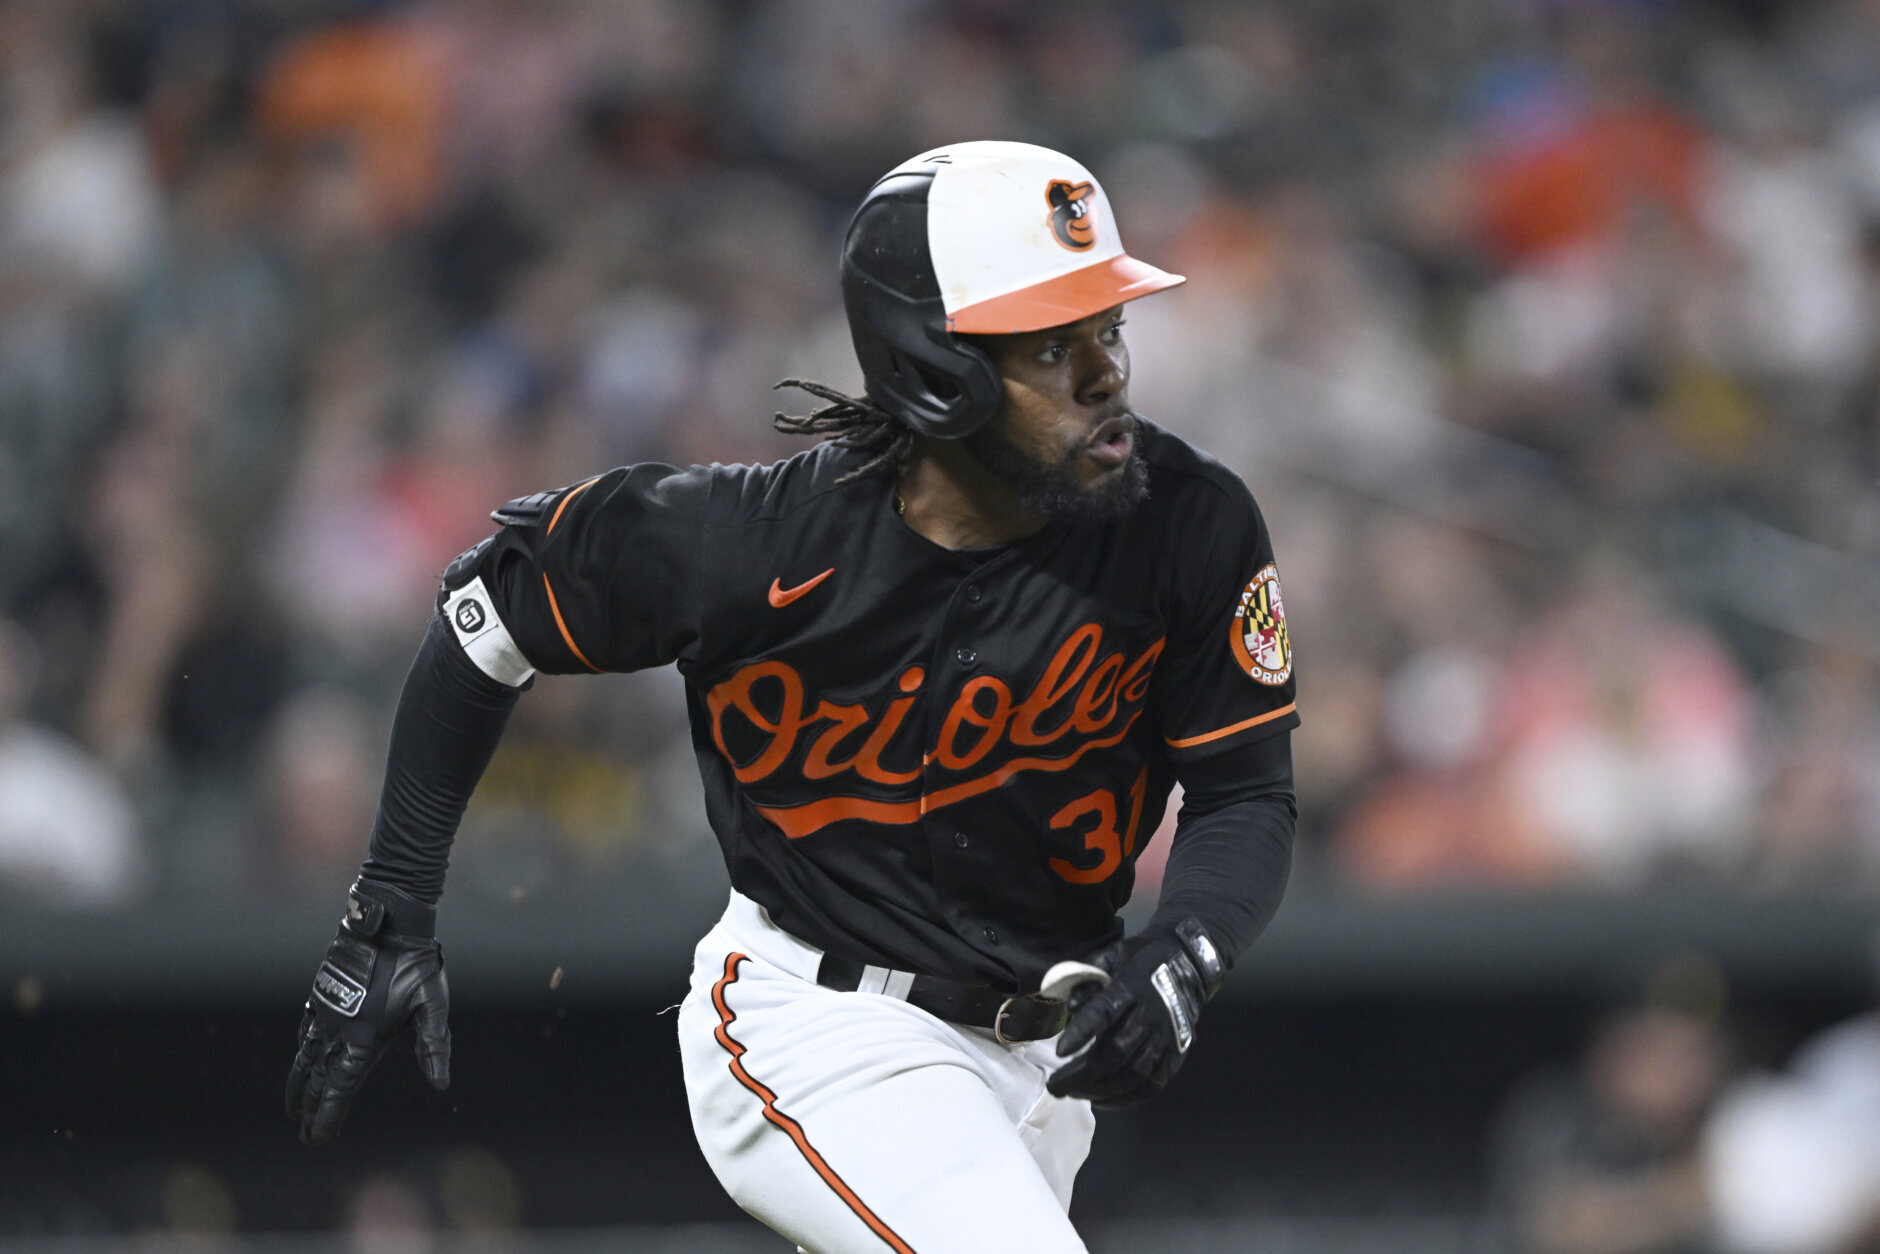 Cedric Mullins hits for the cycle as Orioles beat Pirates 6-3